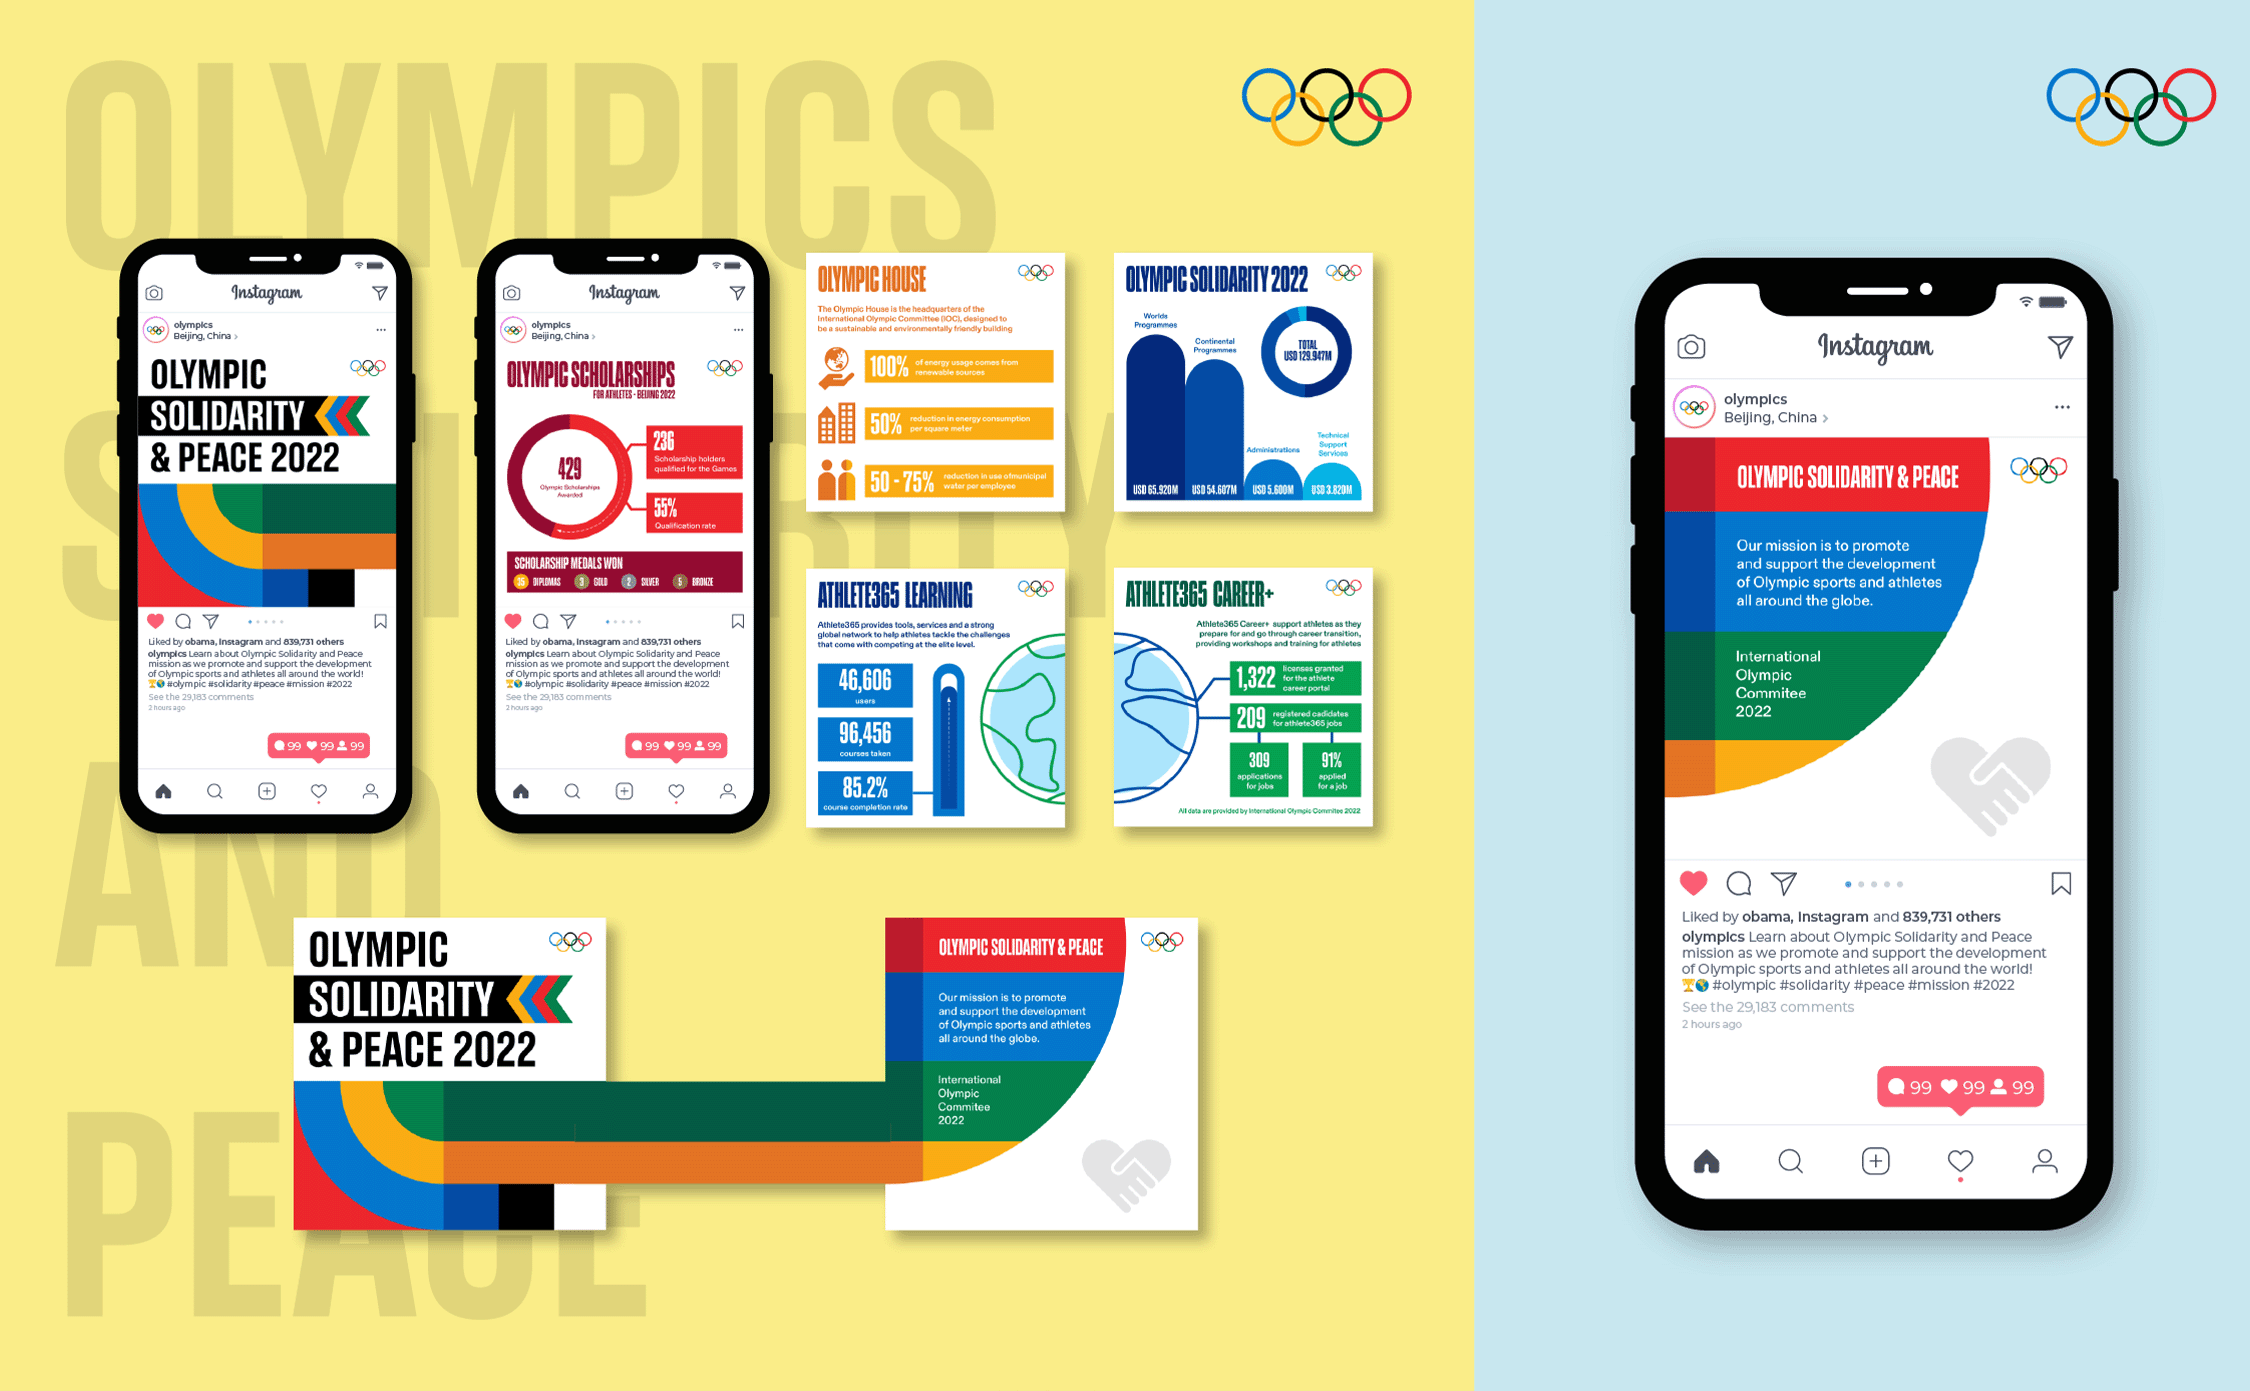 Social media marketing for the Olympics, filled with infographics. Mockups as if they are on an Instagram feed.